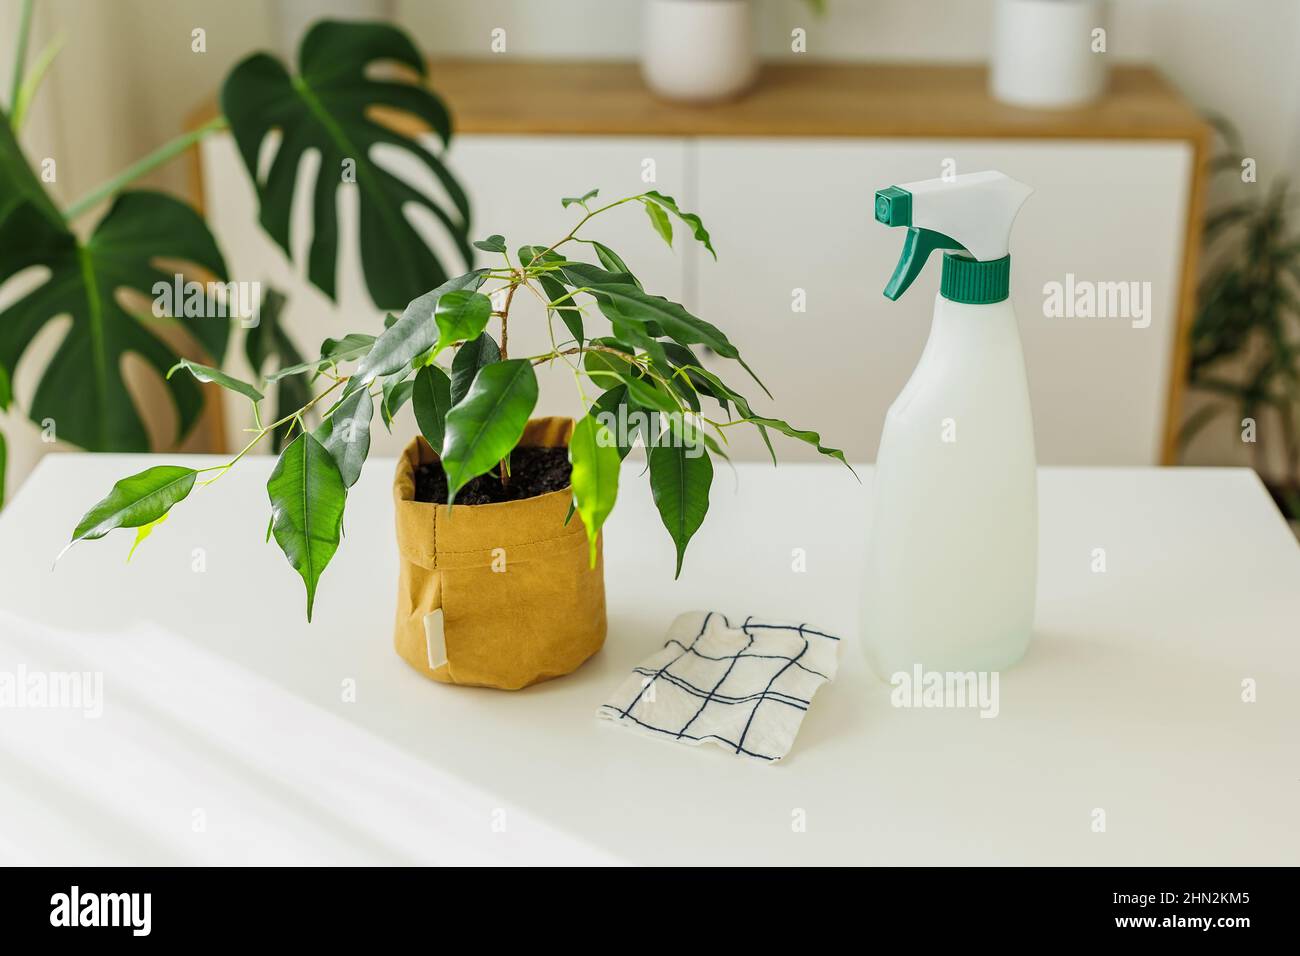 Tools for watering and cleaning plants - spraying bottle and rag near ficus. Concept of home gardening and houseplants care at springtime. Stock Photo